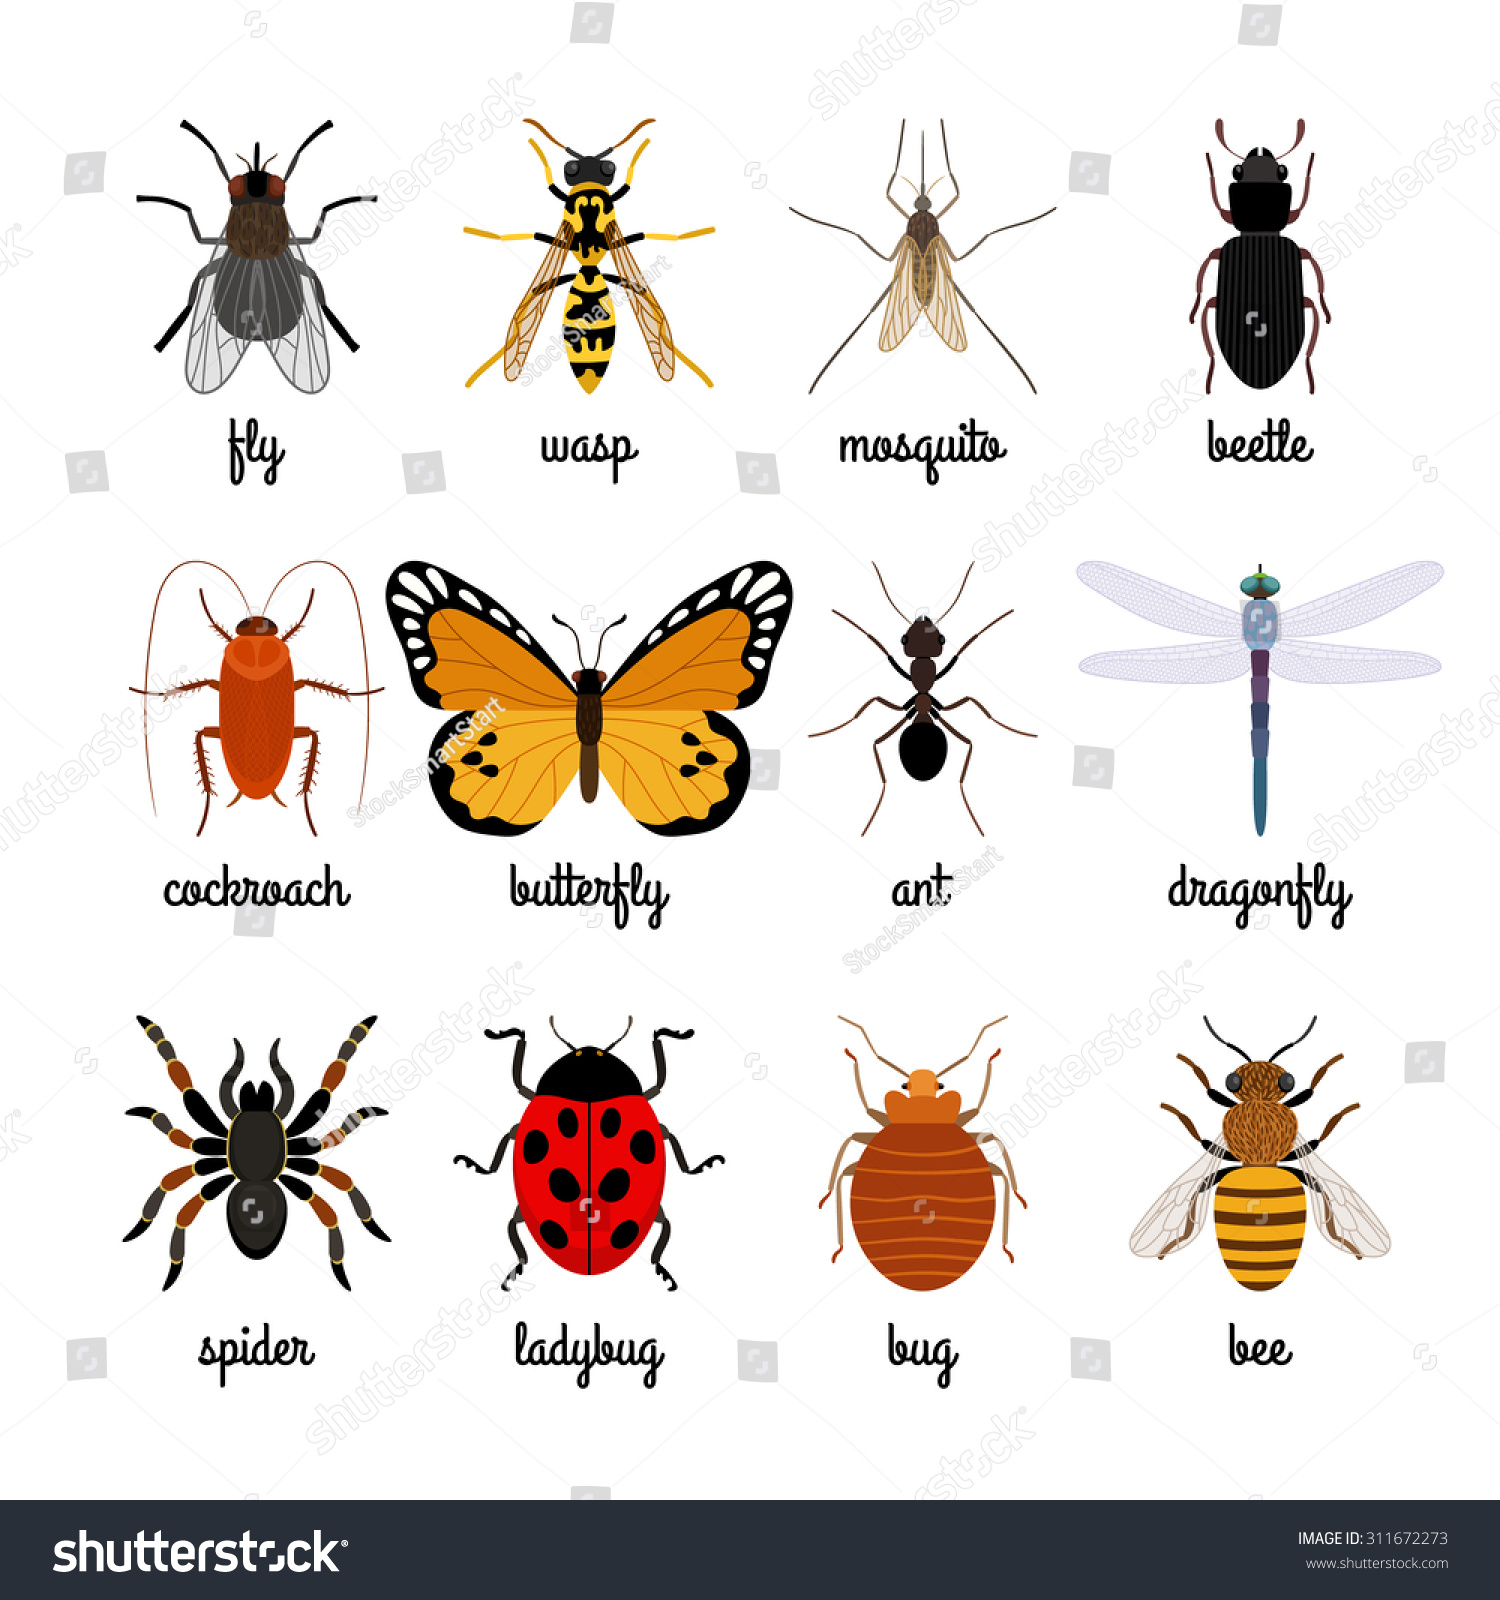 Insects Vector Over White Background Insect Stock Vector (Royalty Free ...